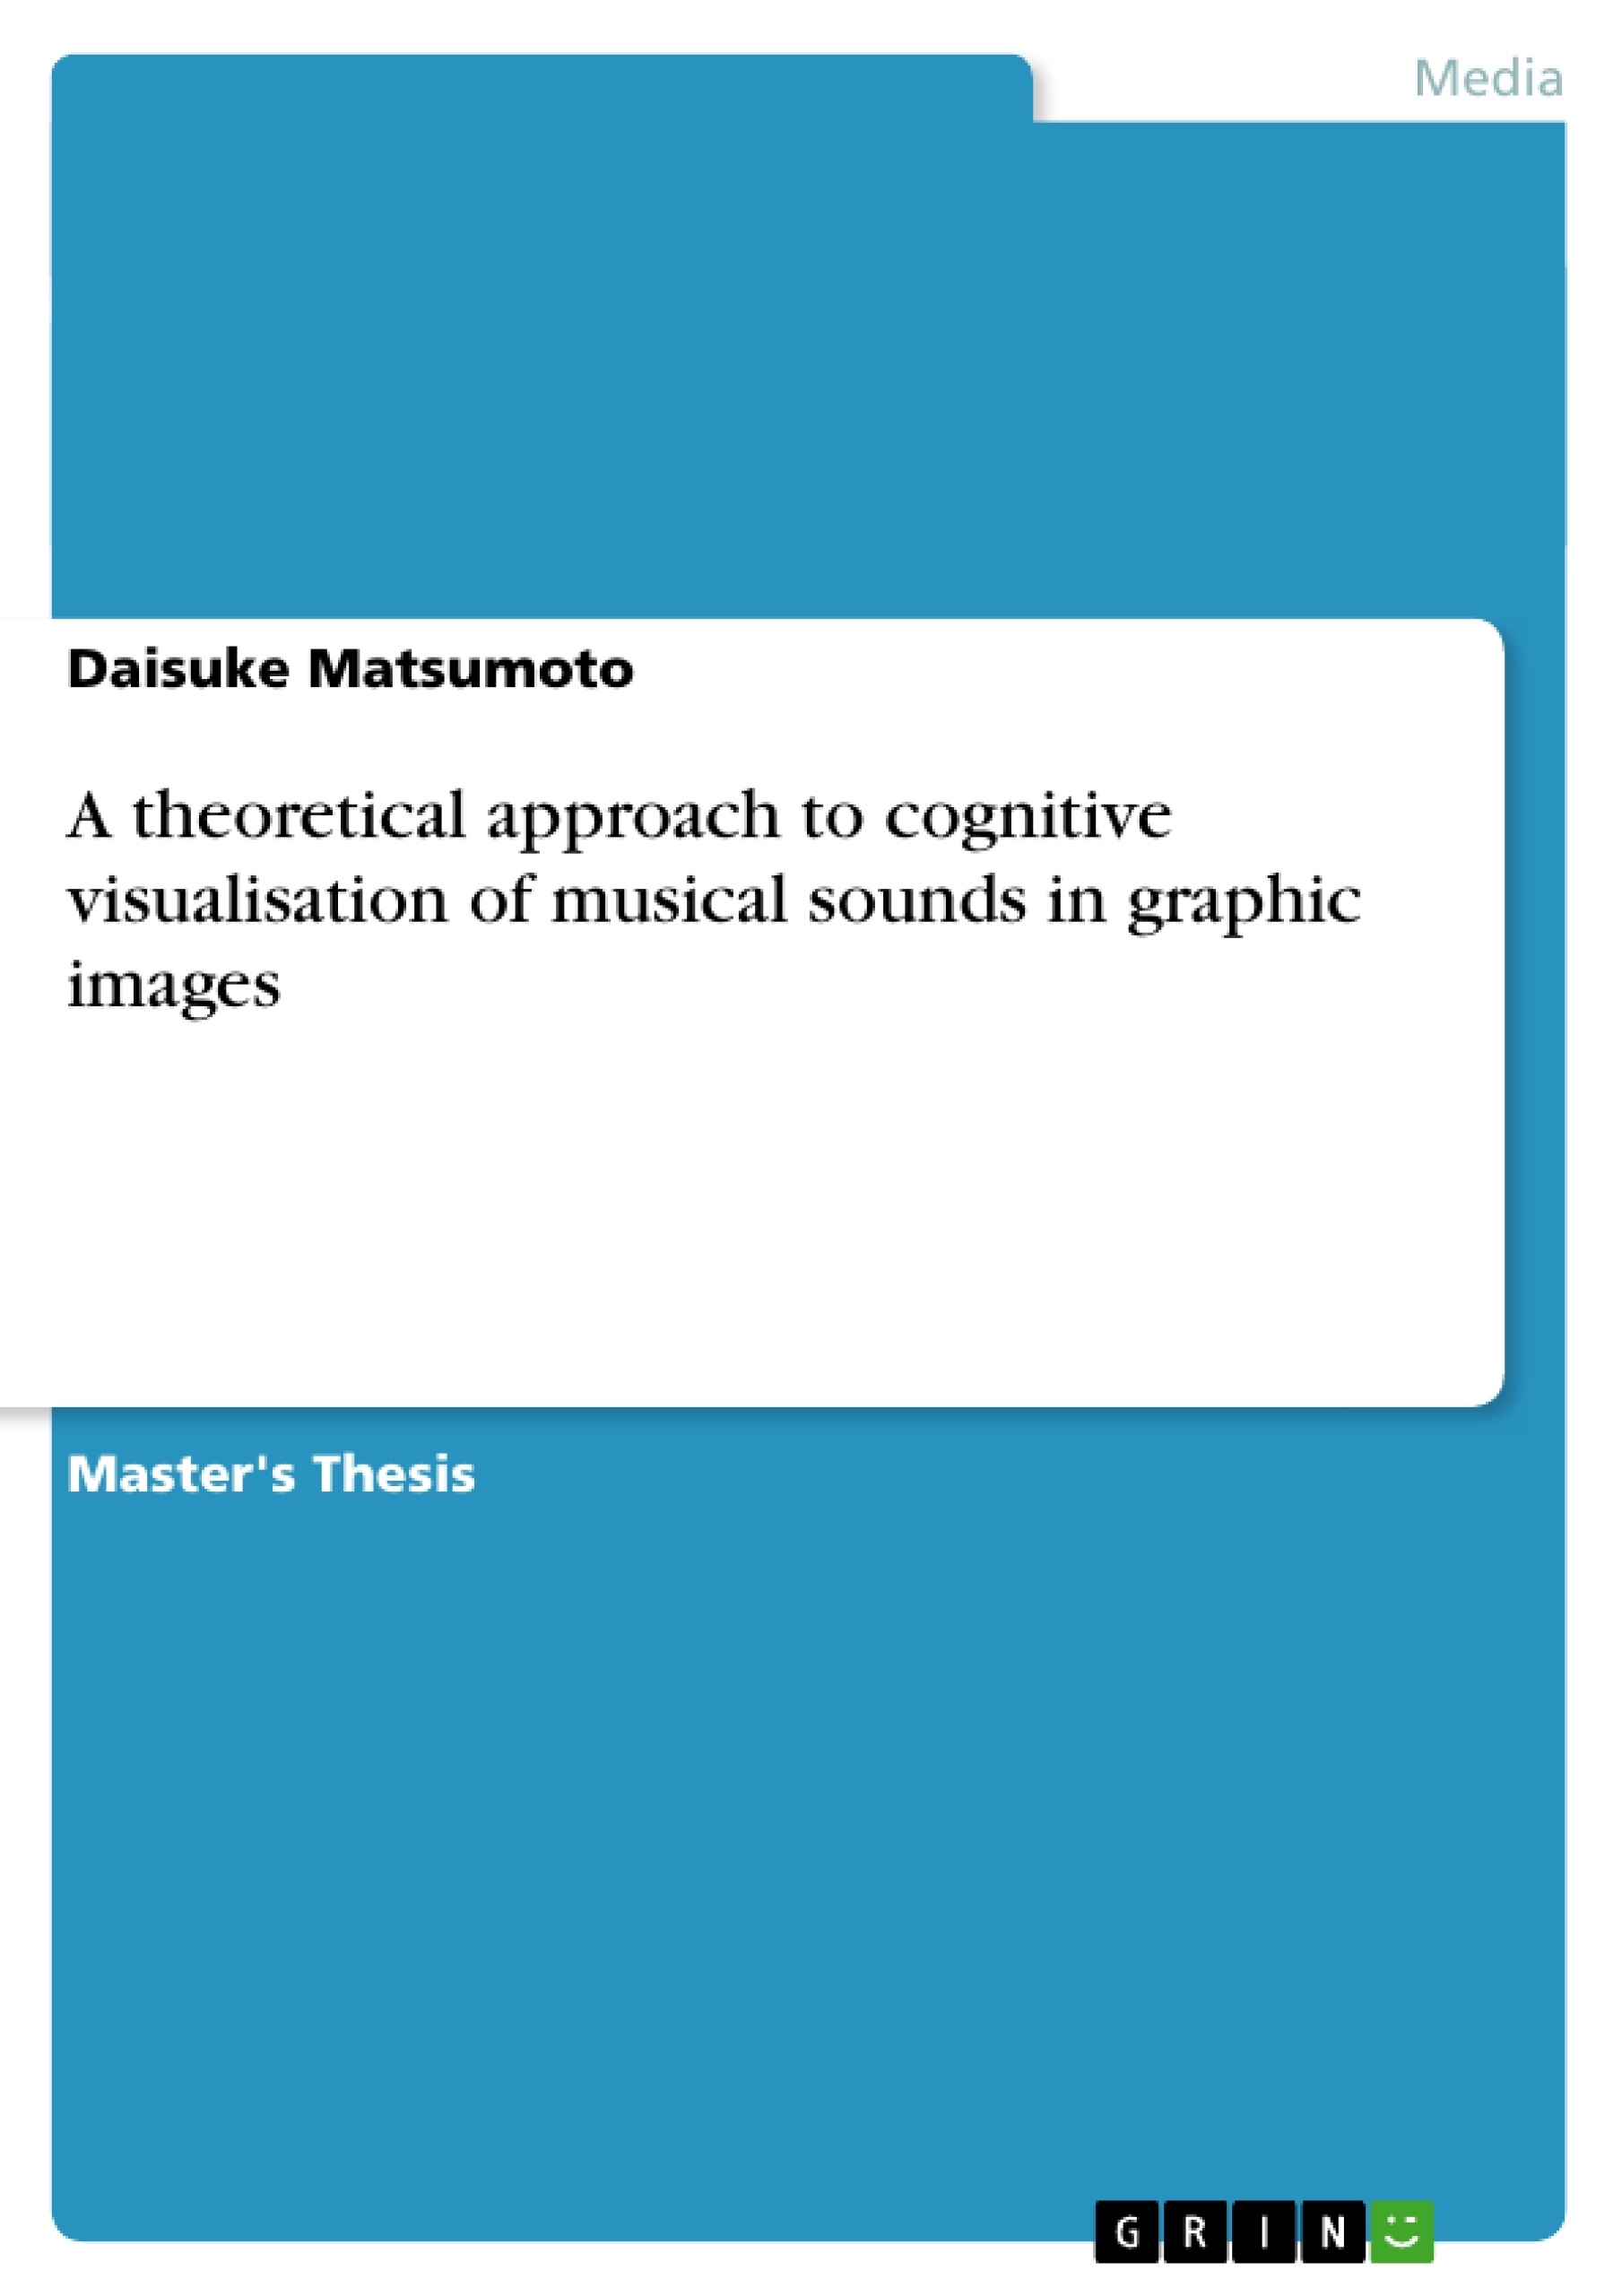 Title: A theoretical approach to cognitive visualisation of musical sounds in graphic images